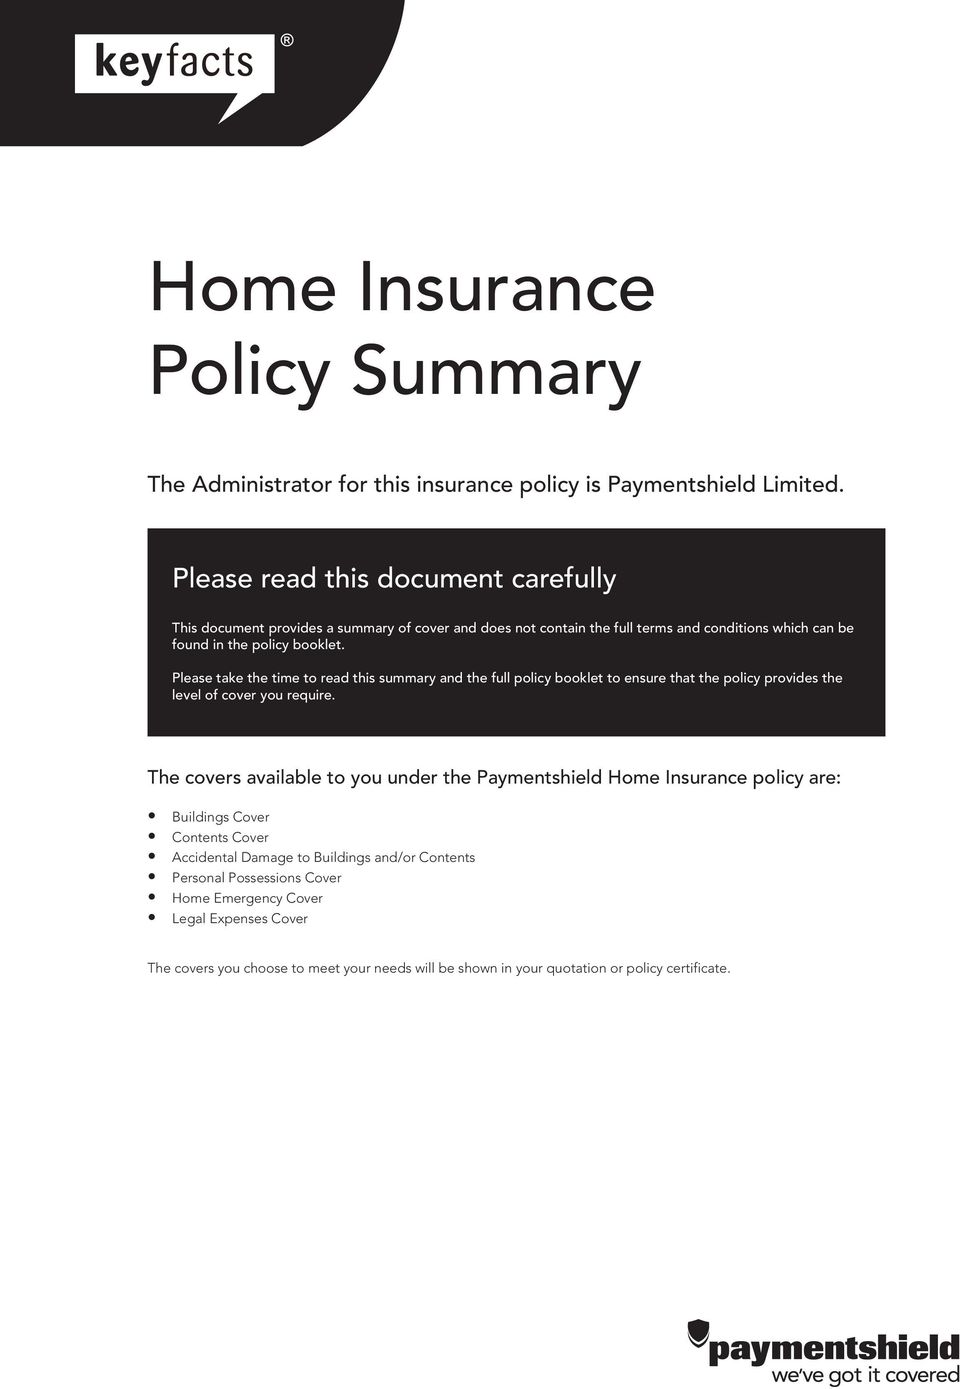 Please take the time to read this summary and the full policy booklet to ensure that the policy provides the level of cover you require.